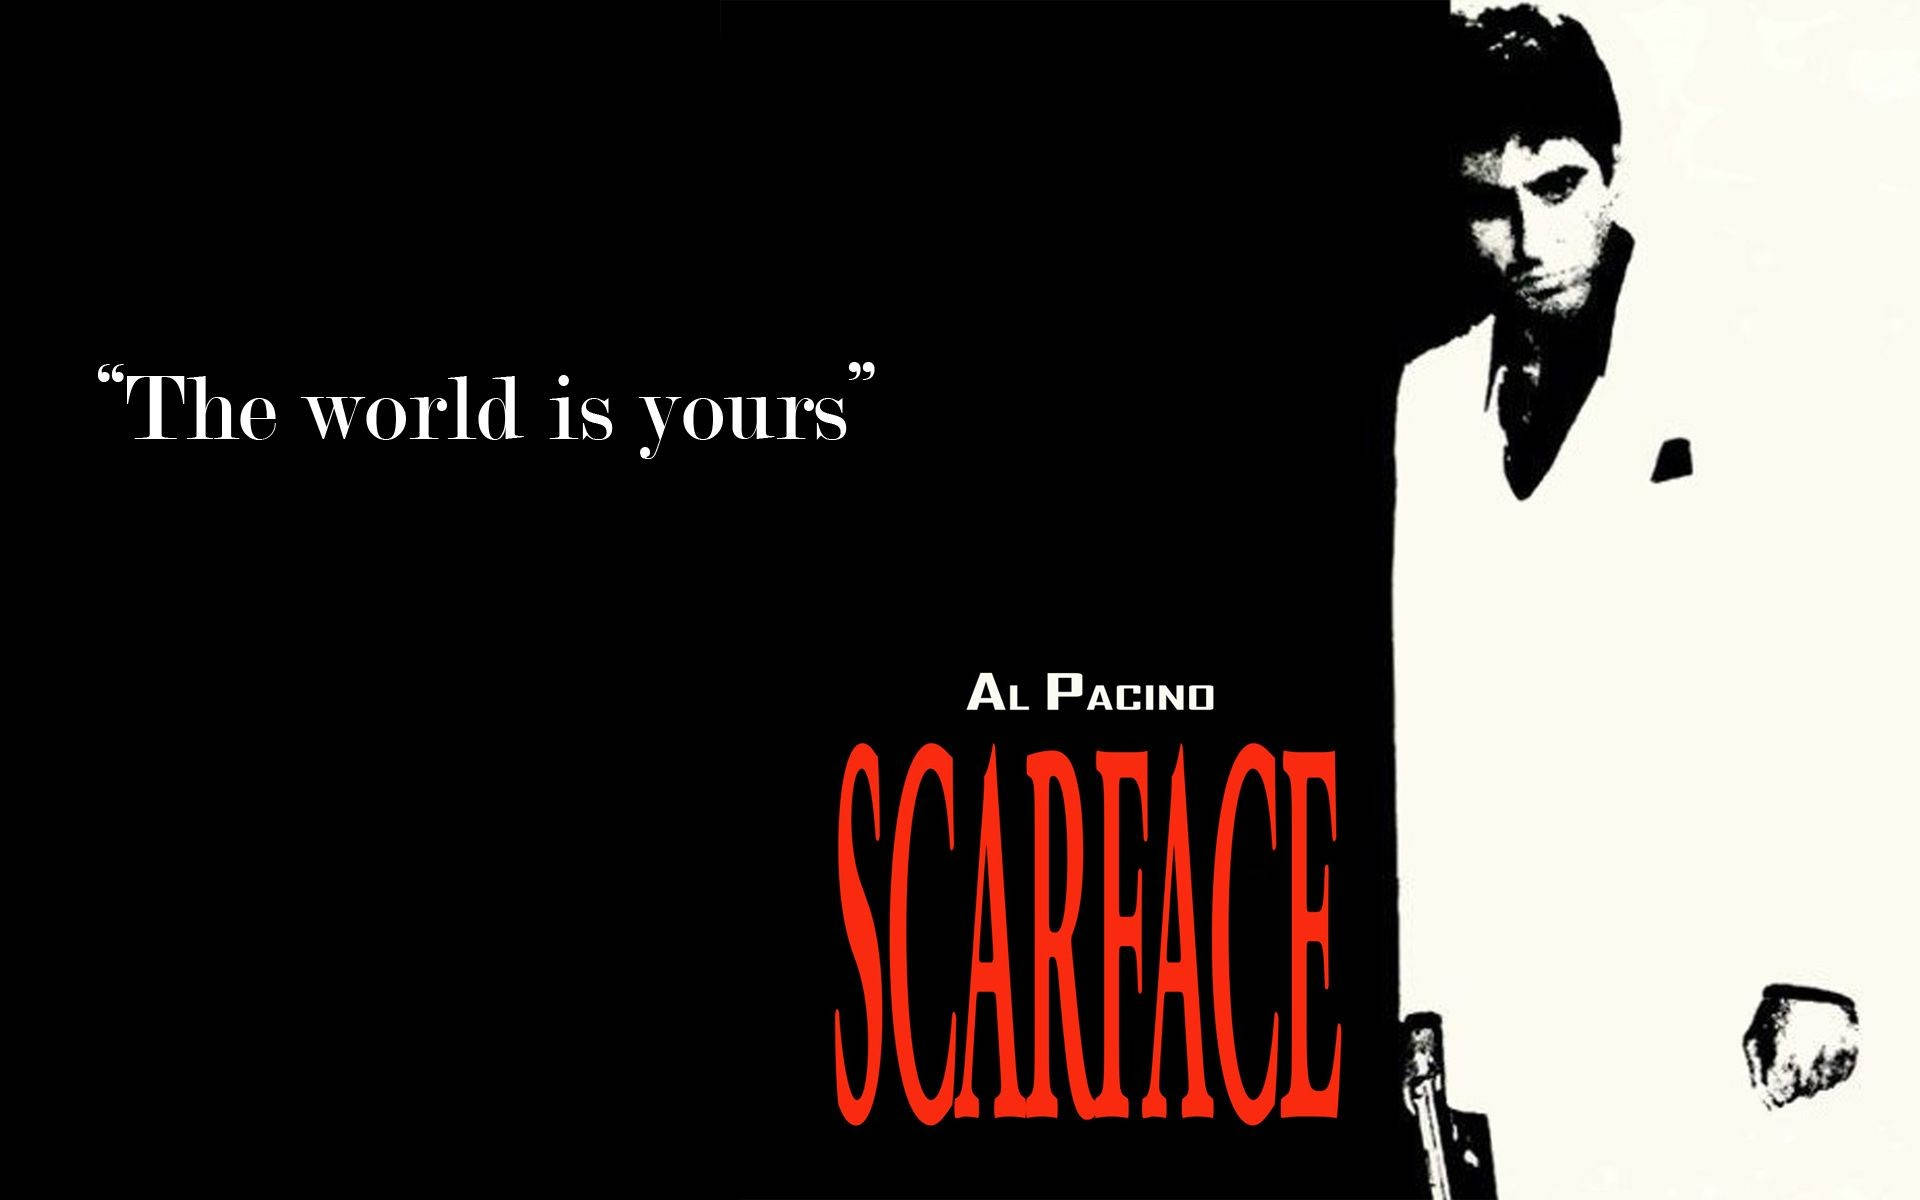 Al Pacino Scarface The World Is Yours